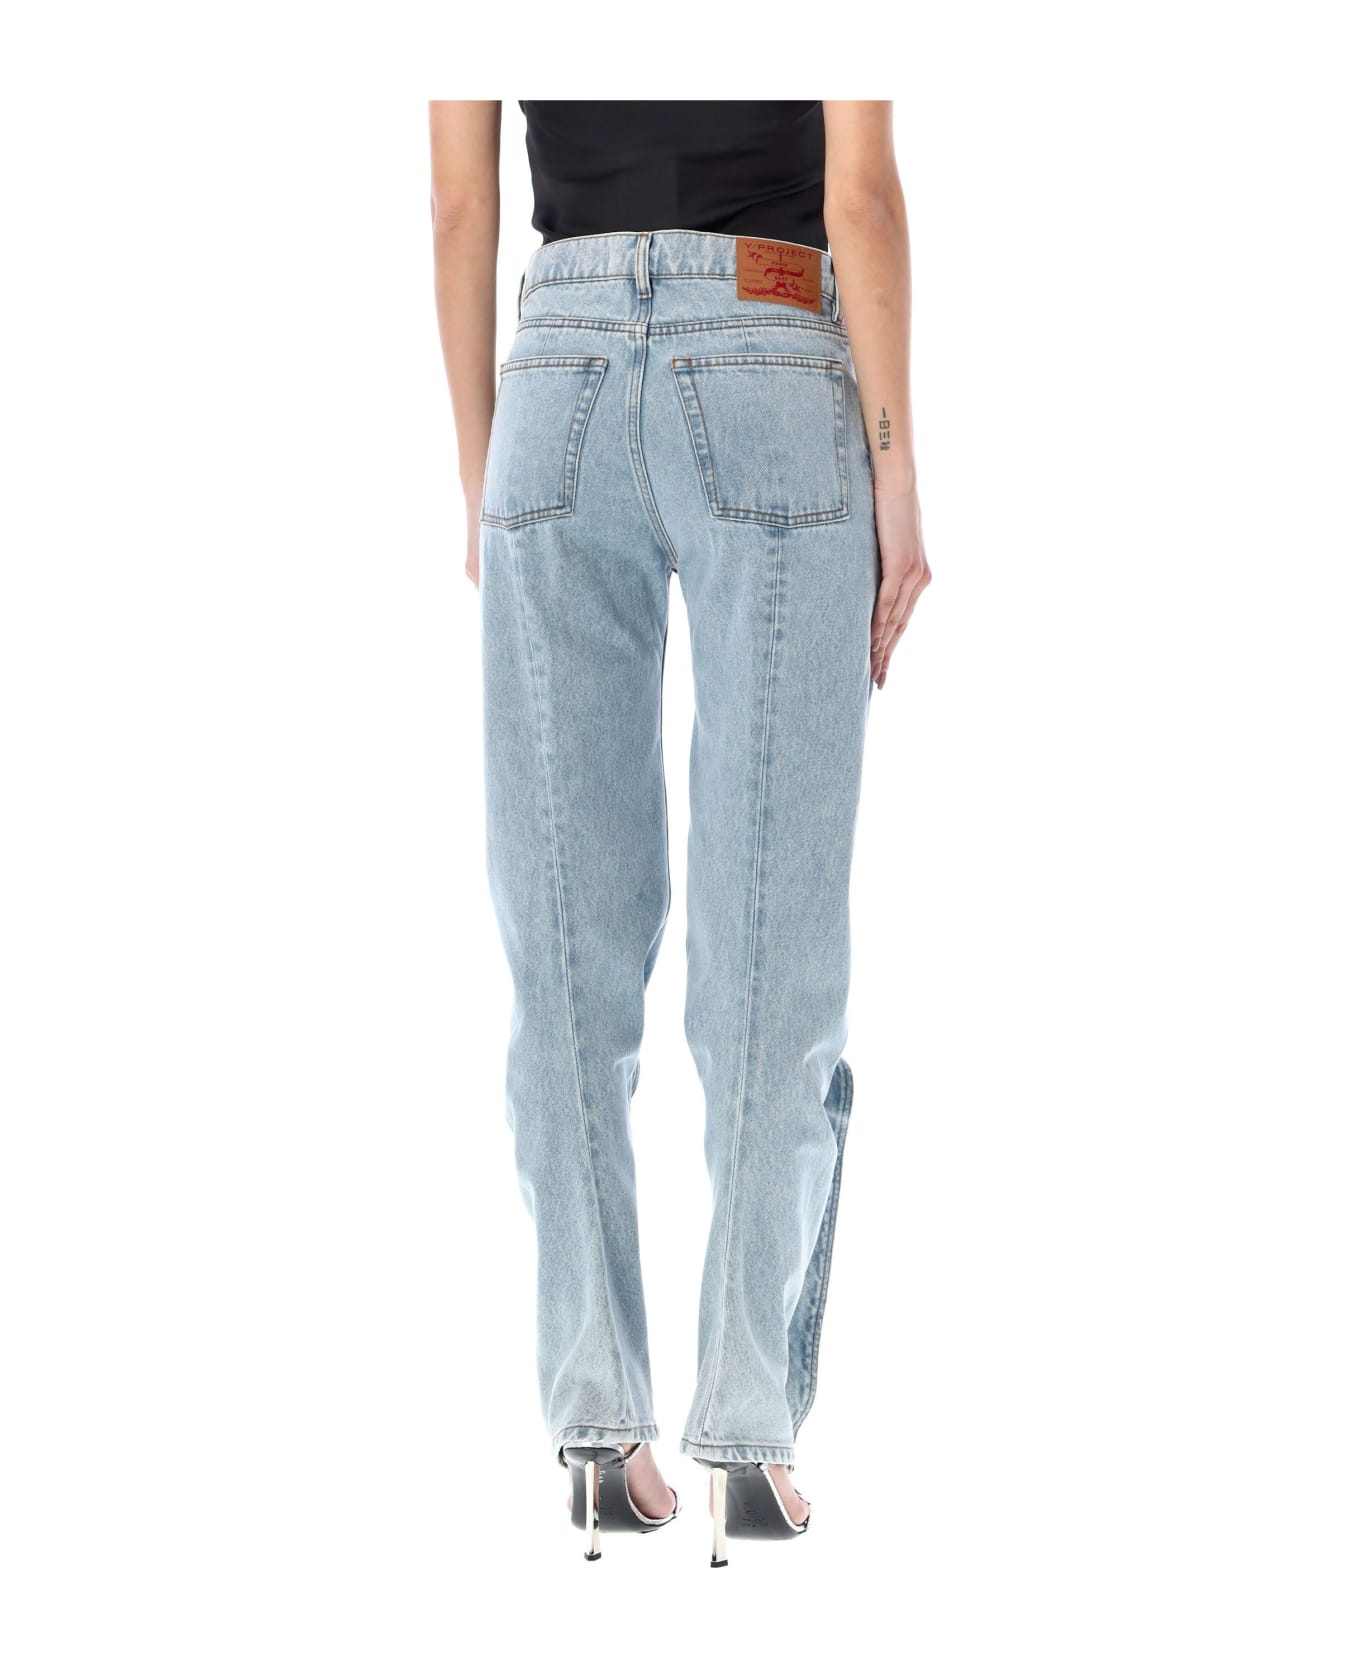 Y/Project Banana Slim Jeans - EVERGREEN ICE BLUE